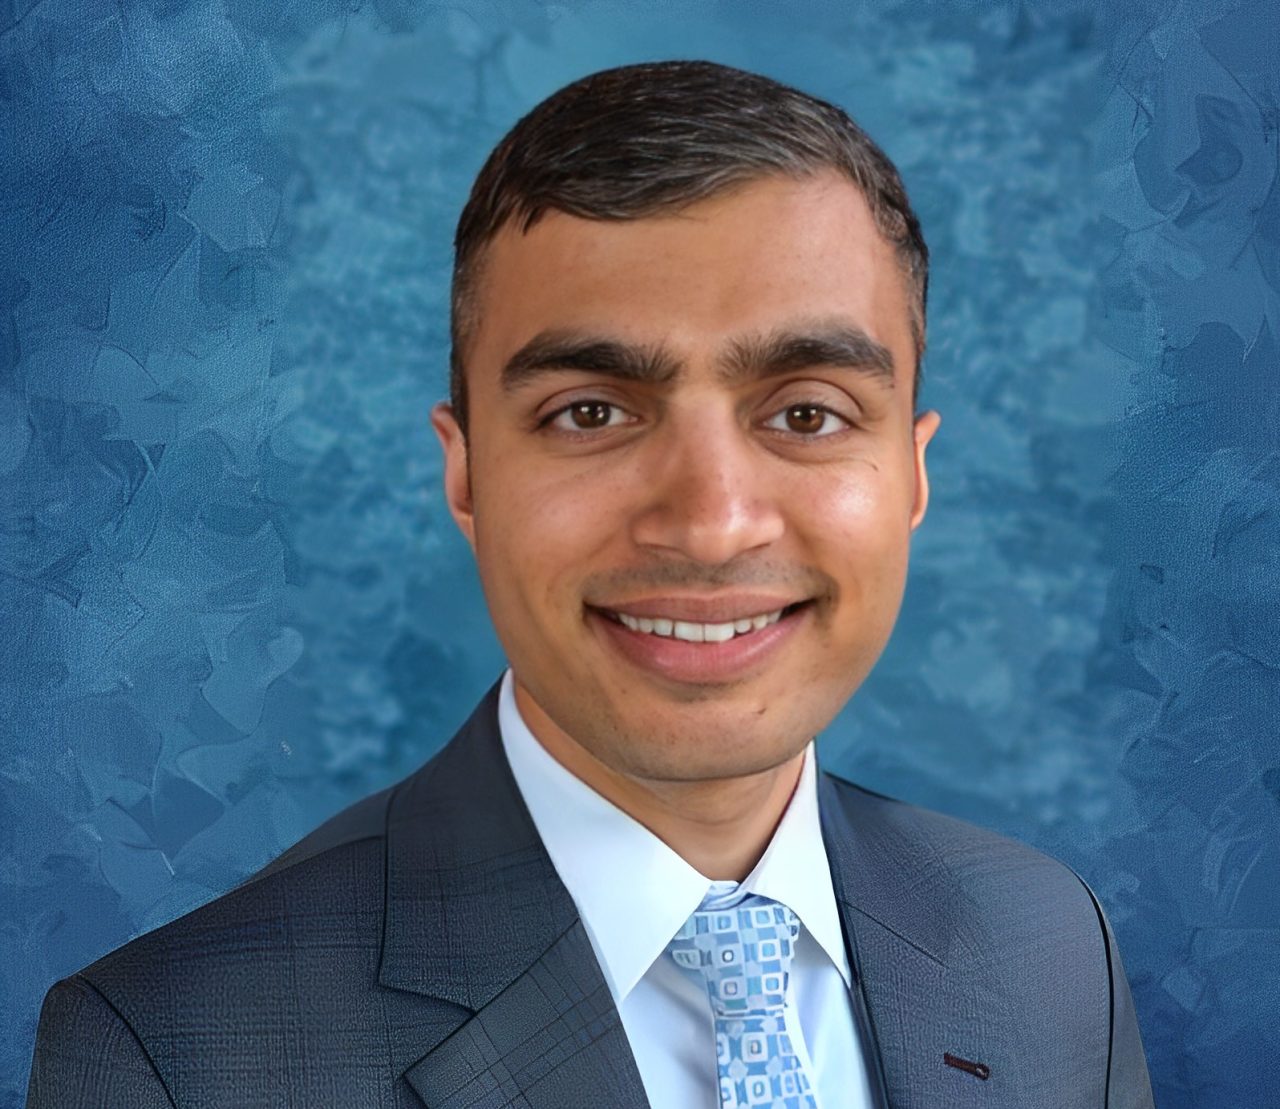 Karun Neupane: Dreams do come true. I am going to Moffitt Cancer Center to become a hematologist/oncologist!